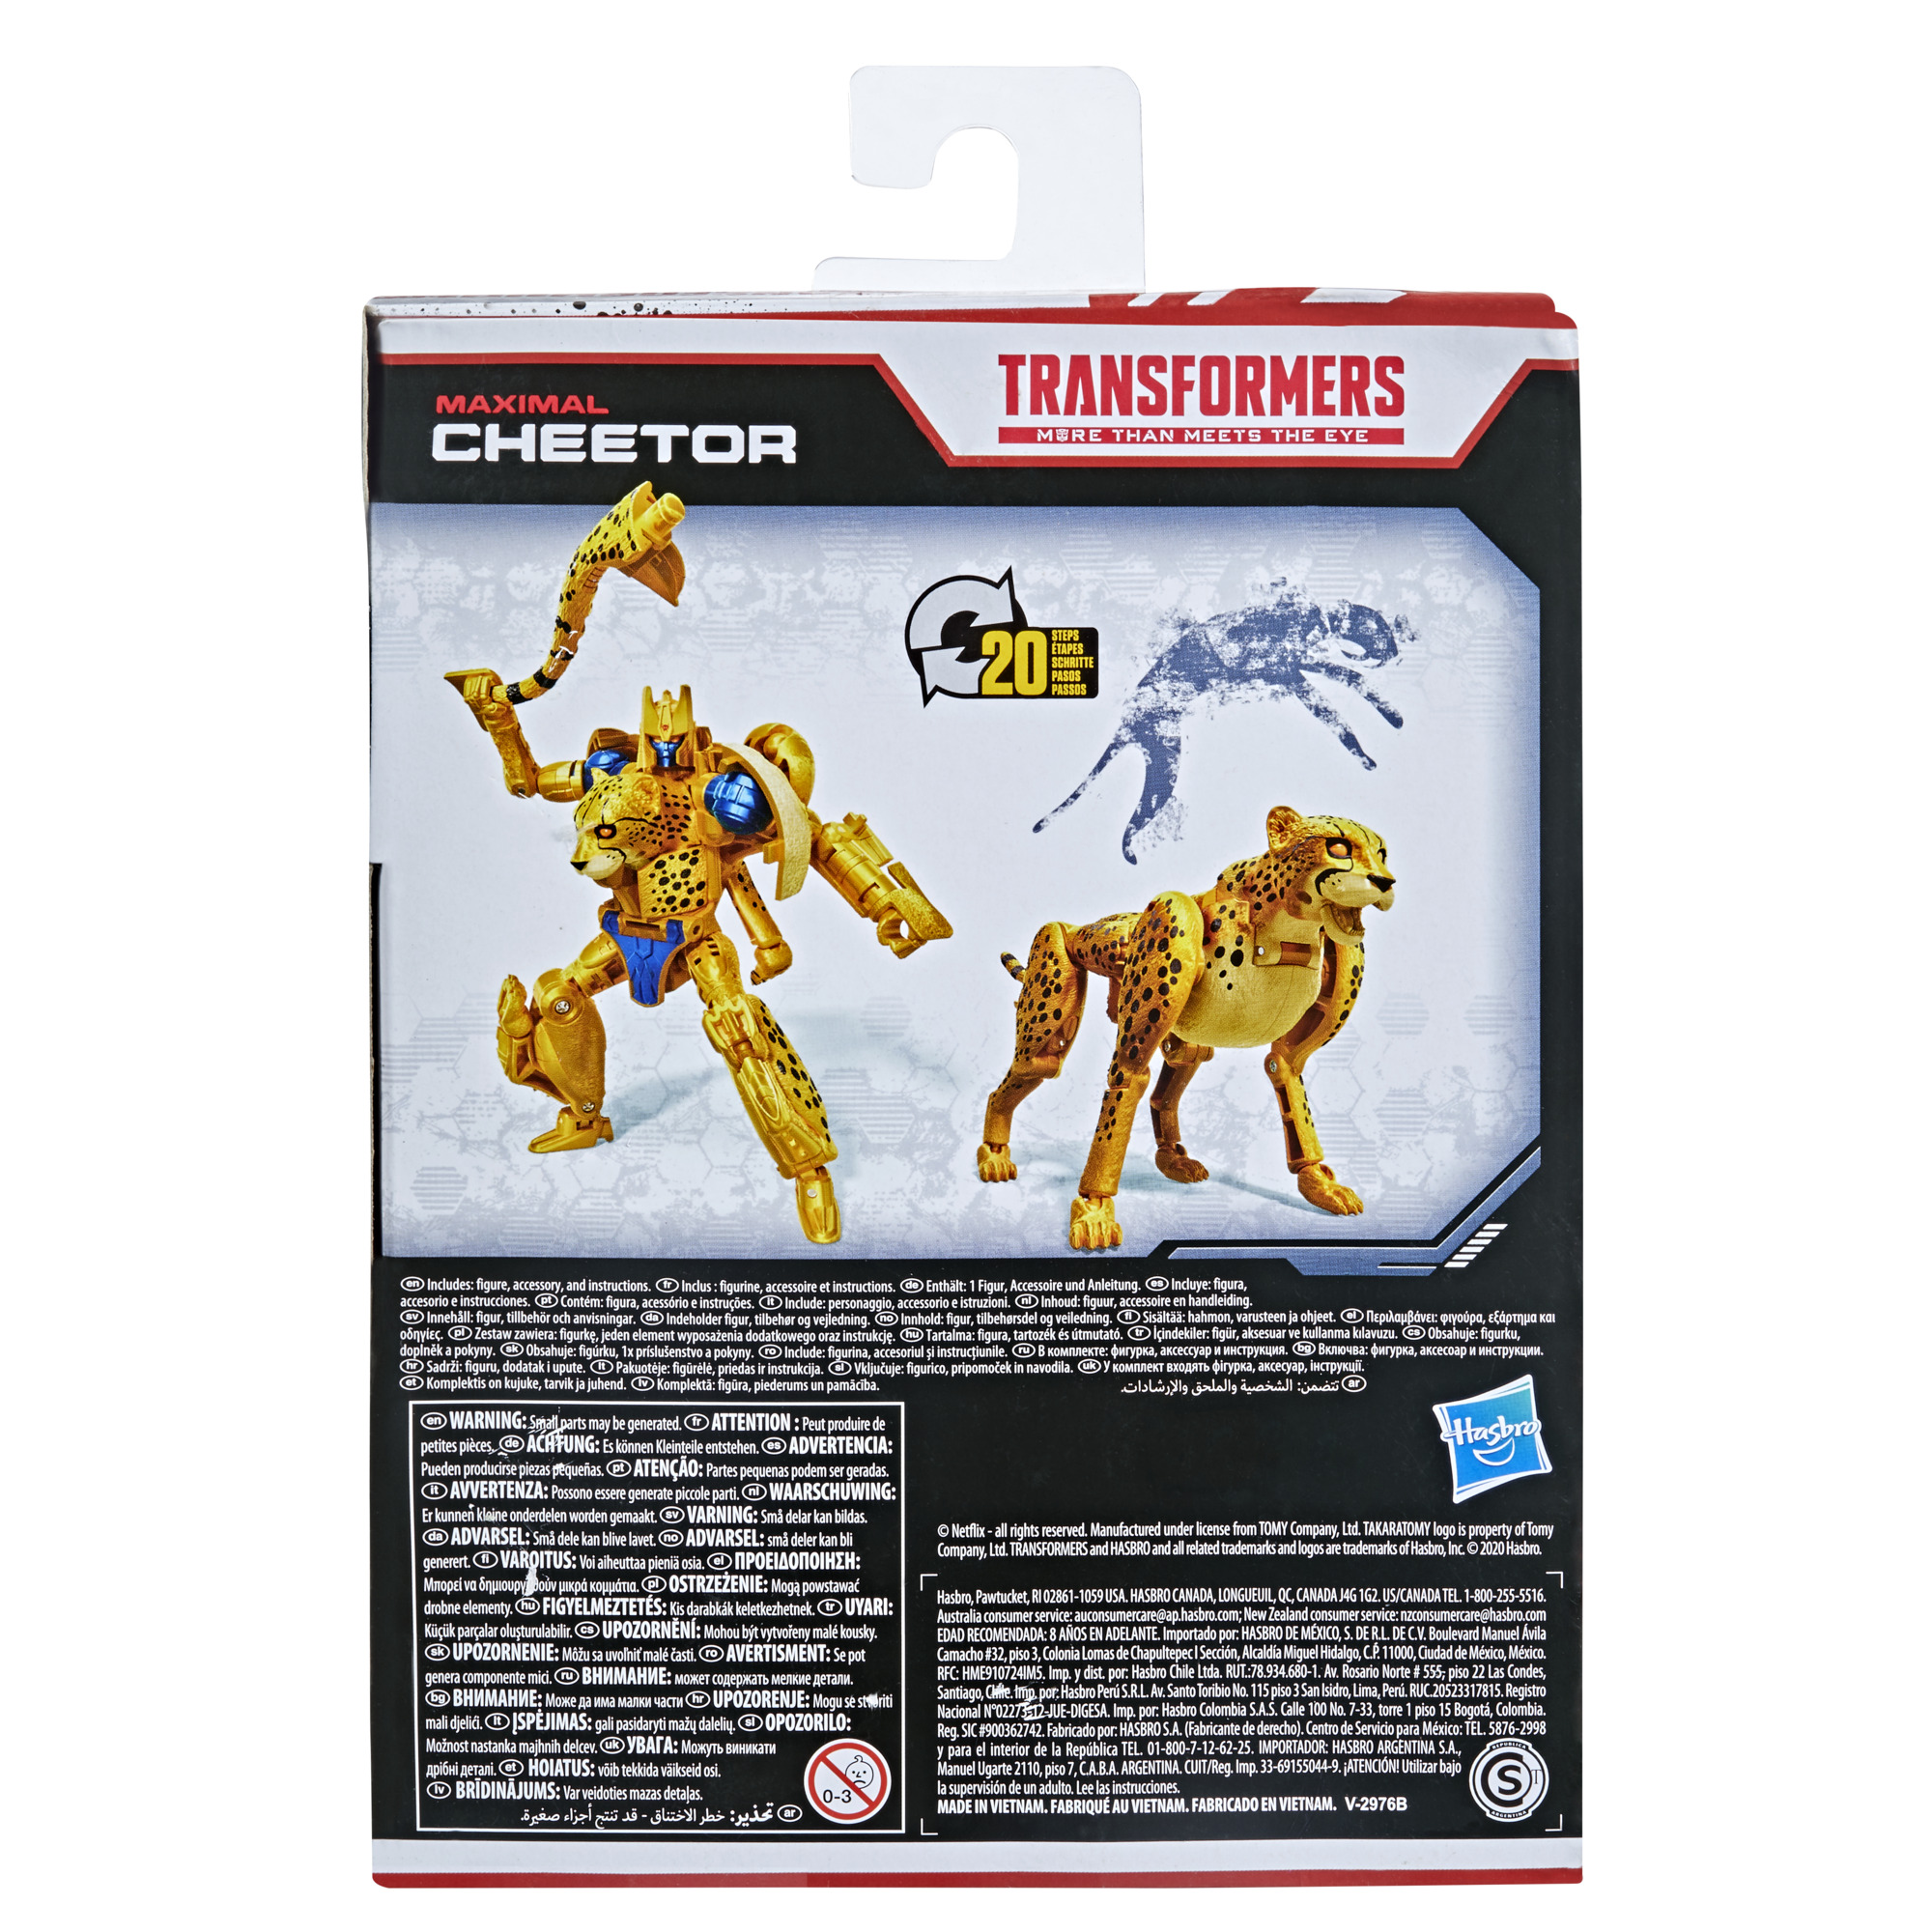 Transformers: War for Cybertron Cheetor Kids Toy Action Figure for Boys and Girls - image 4 of 7